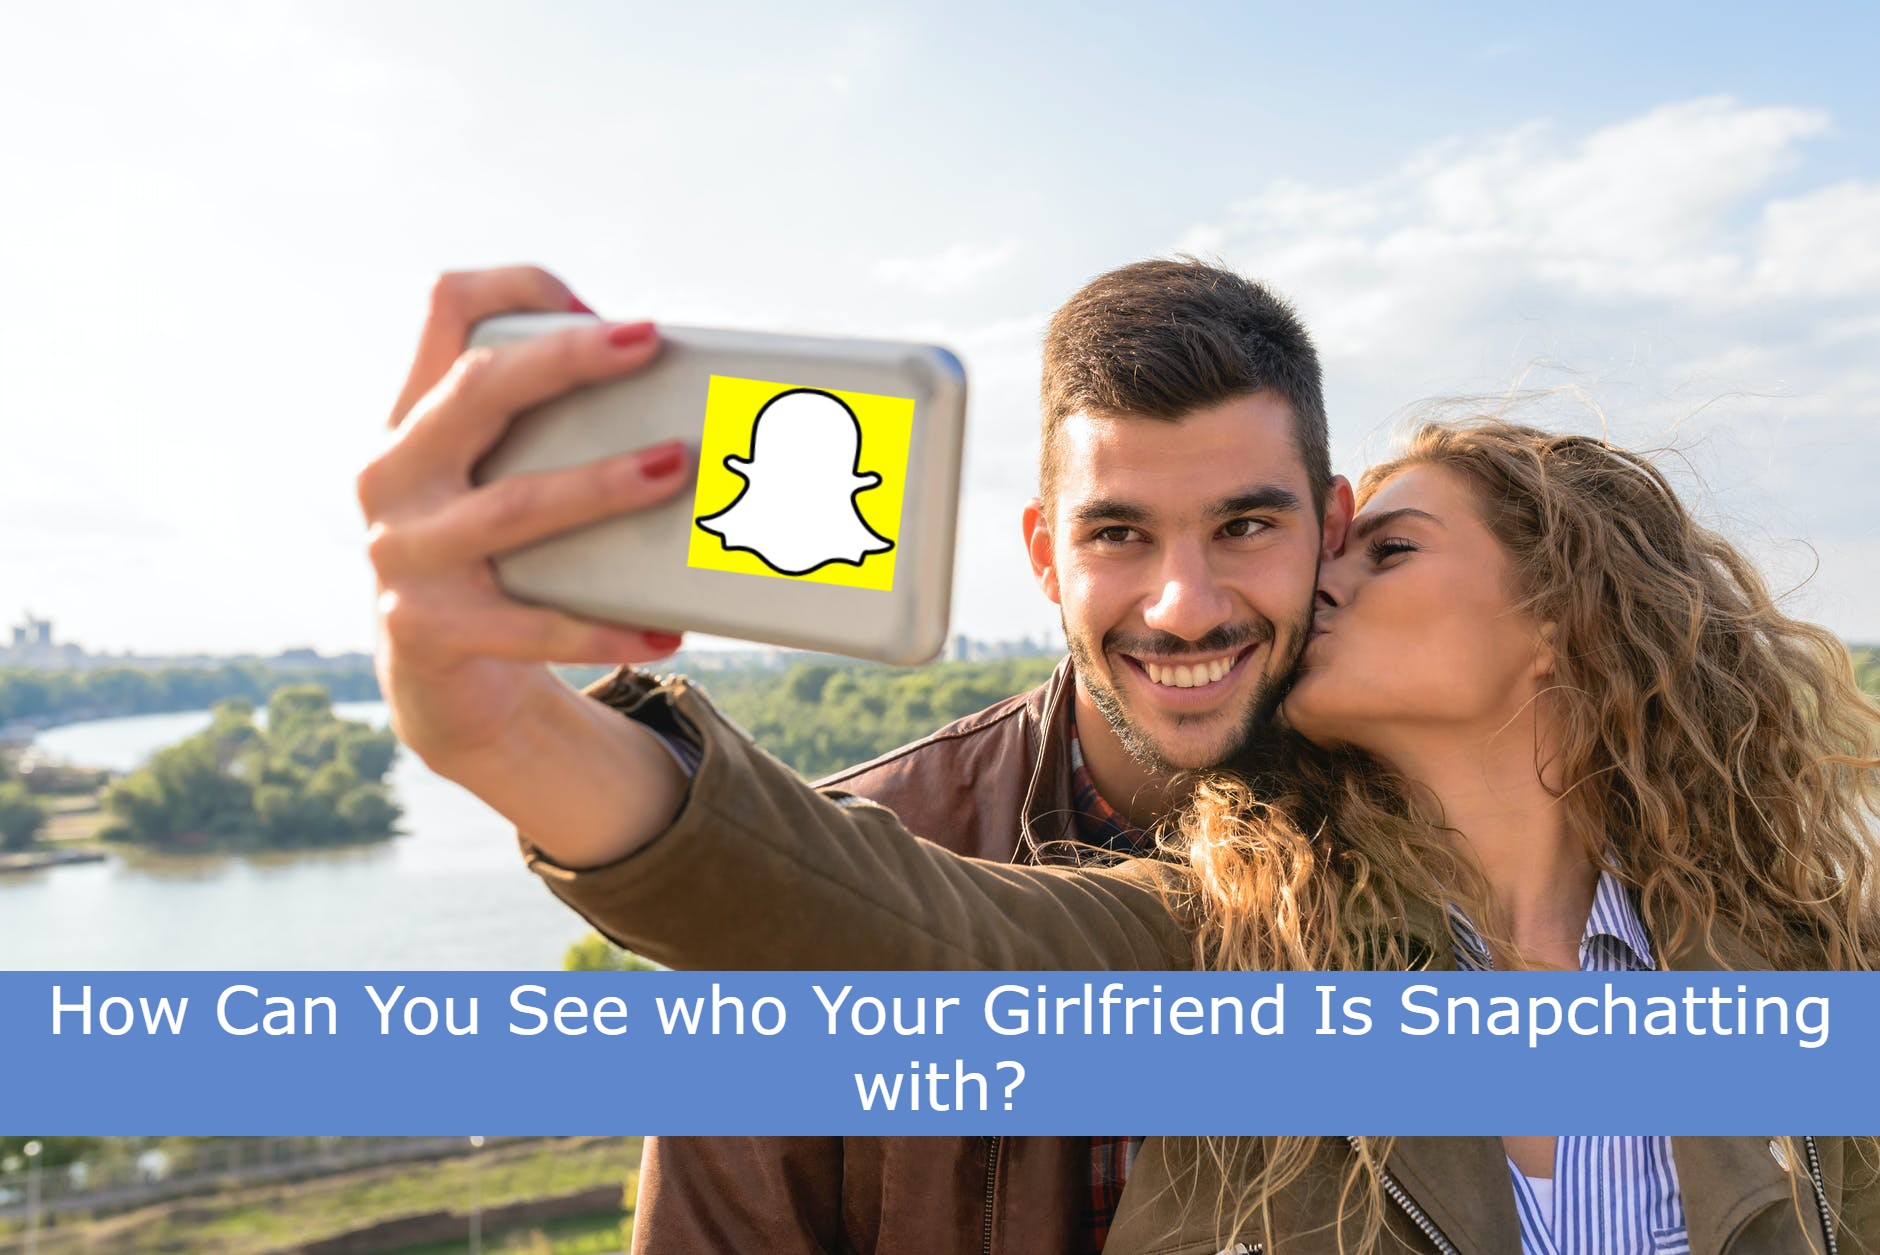 How to see who girlfriend is snapchatting with by checking her phone